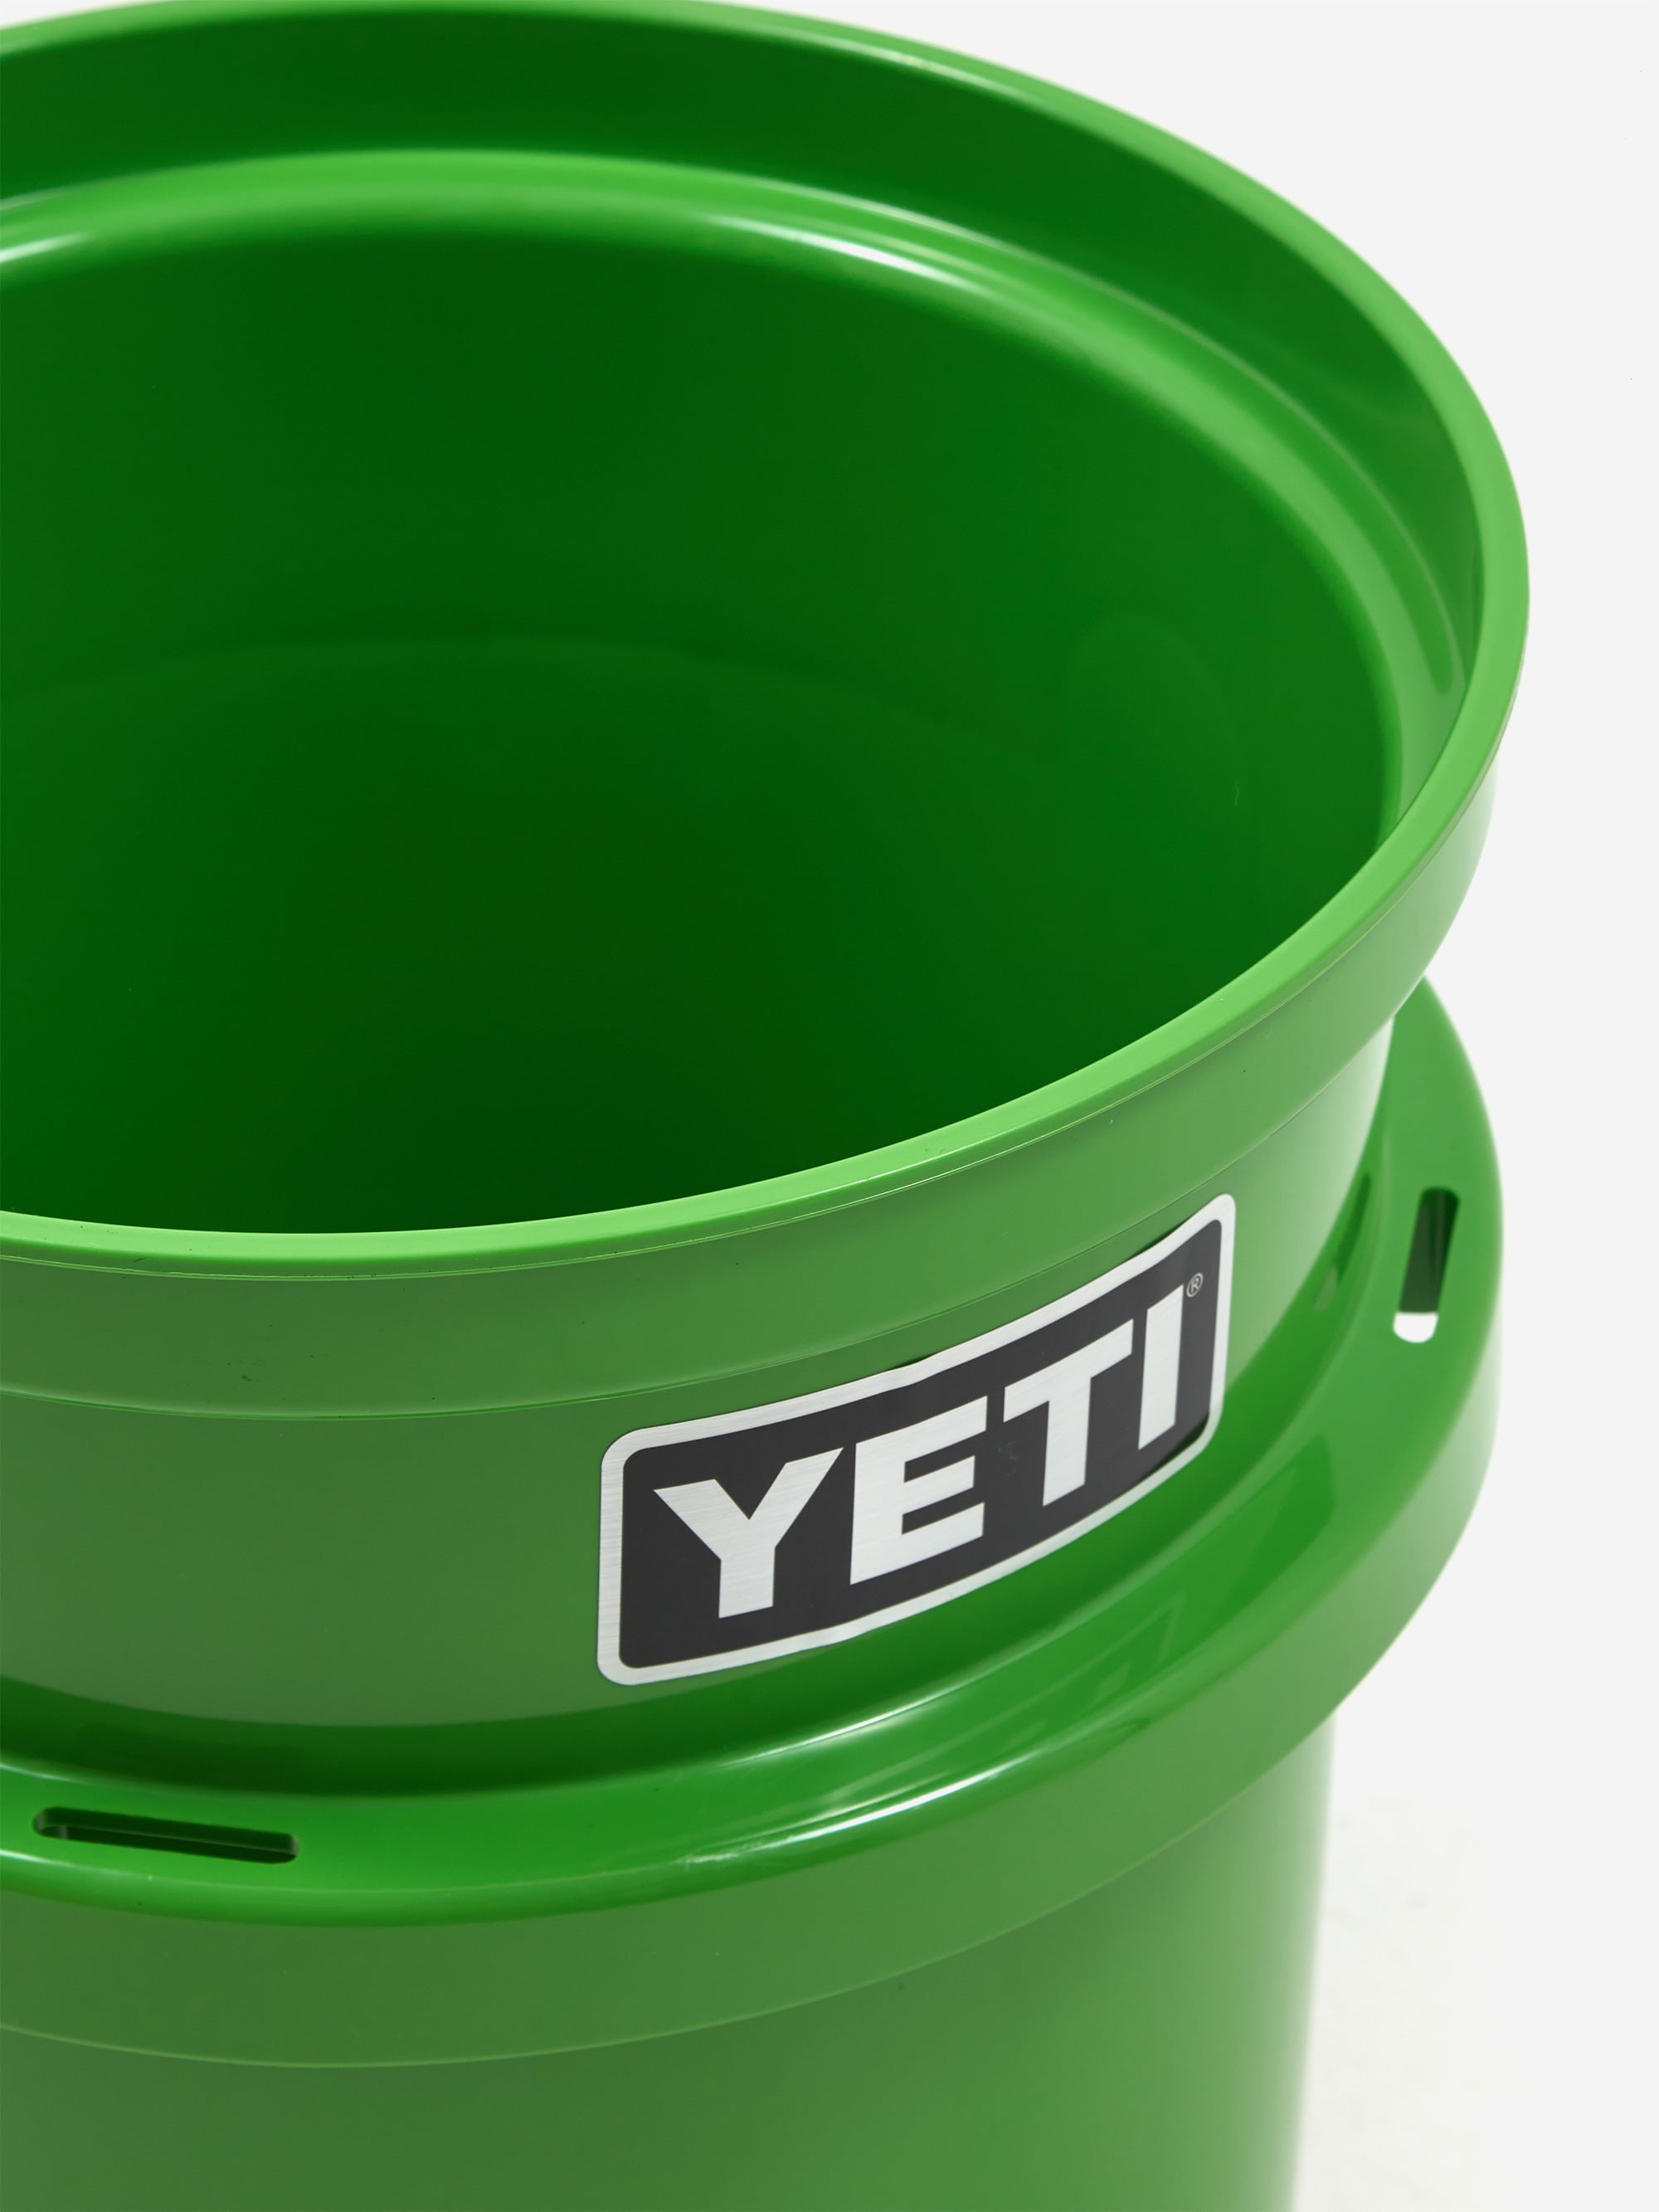 NEW YETI 5 Gallon LOADOUT BUCKET Canopy Green Limited Edition